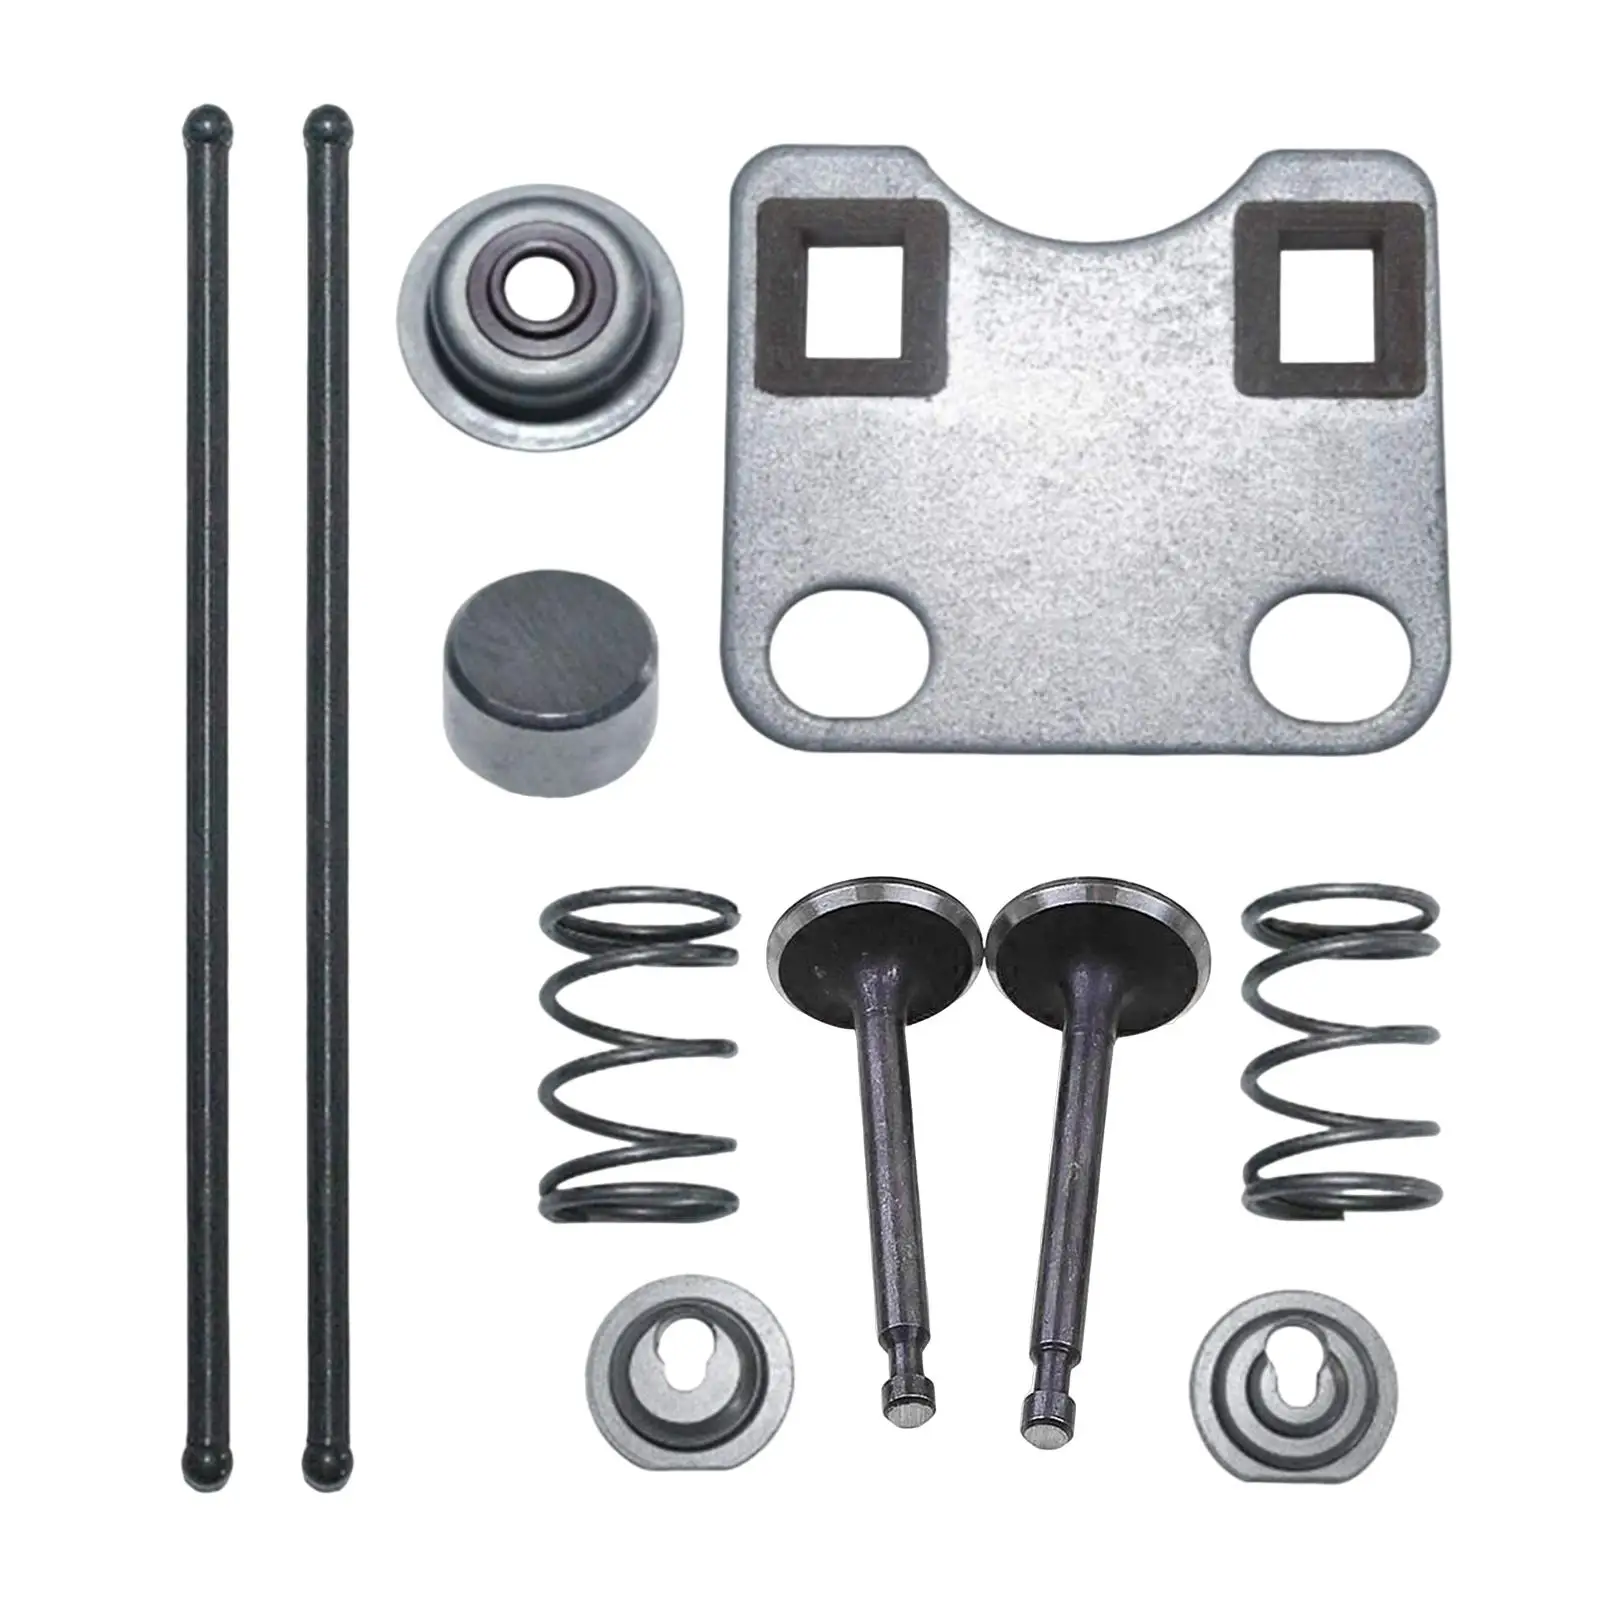 11Pcs Engine Intake Exhaust Valve Kit 5.5HP 6.5HP Chainsaw Accessories 14791-Ze1-010 Guide Plate Parts for Honda Gx160 Gx200